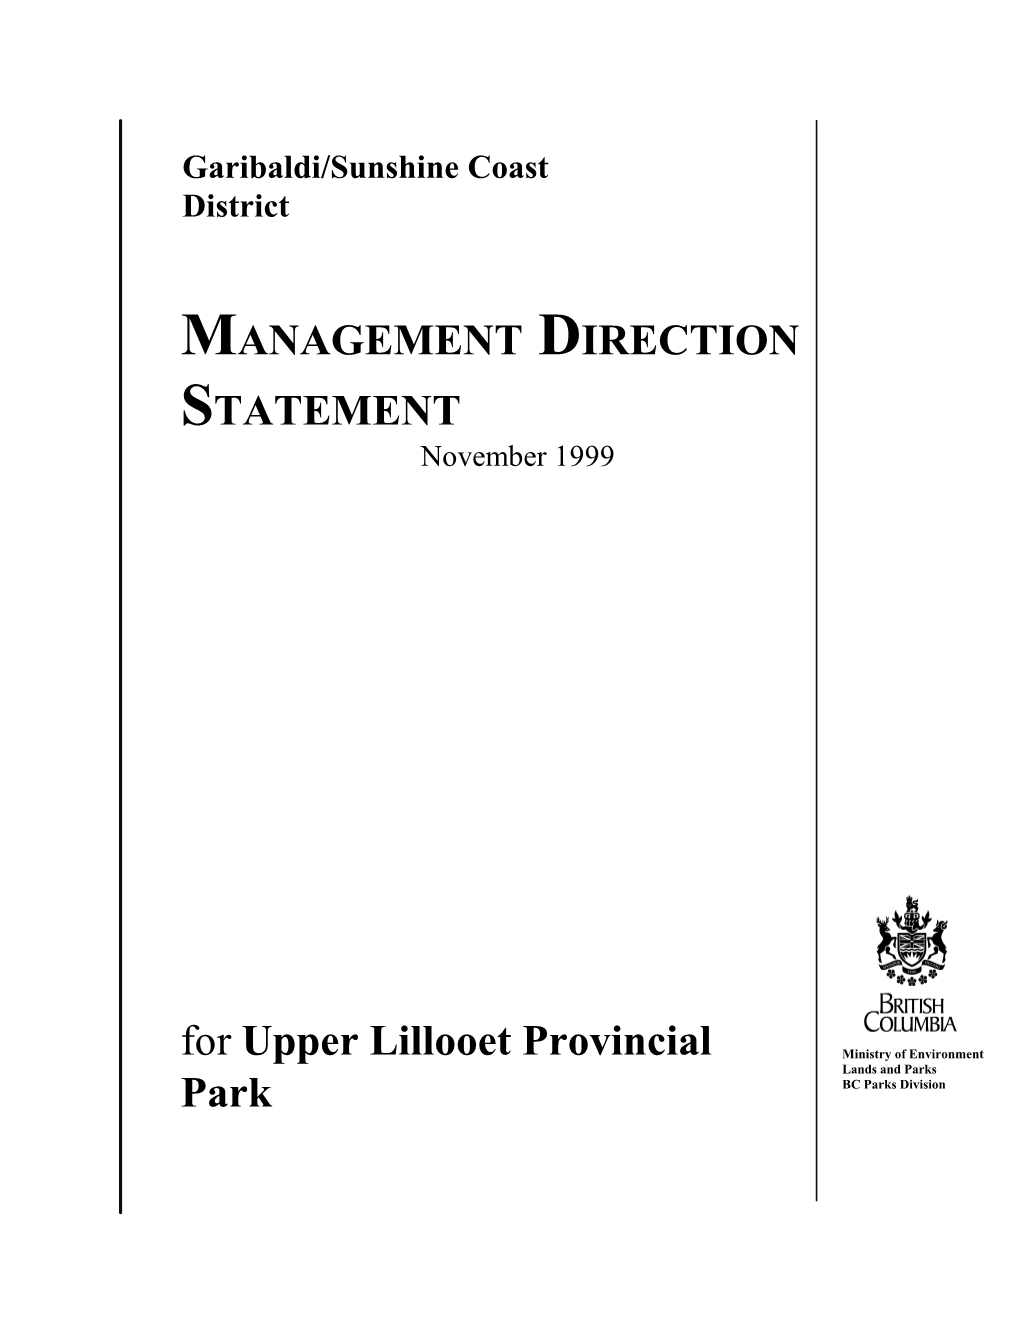 Management Direction Statement for Upper Lillooet Provincial Park Provides Management Direction Until Such Time As a More Detailed Management Plan Is Prepared